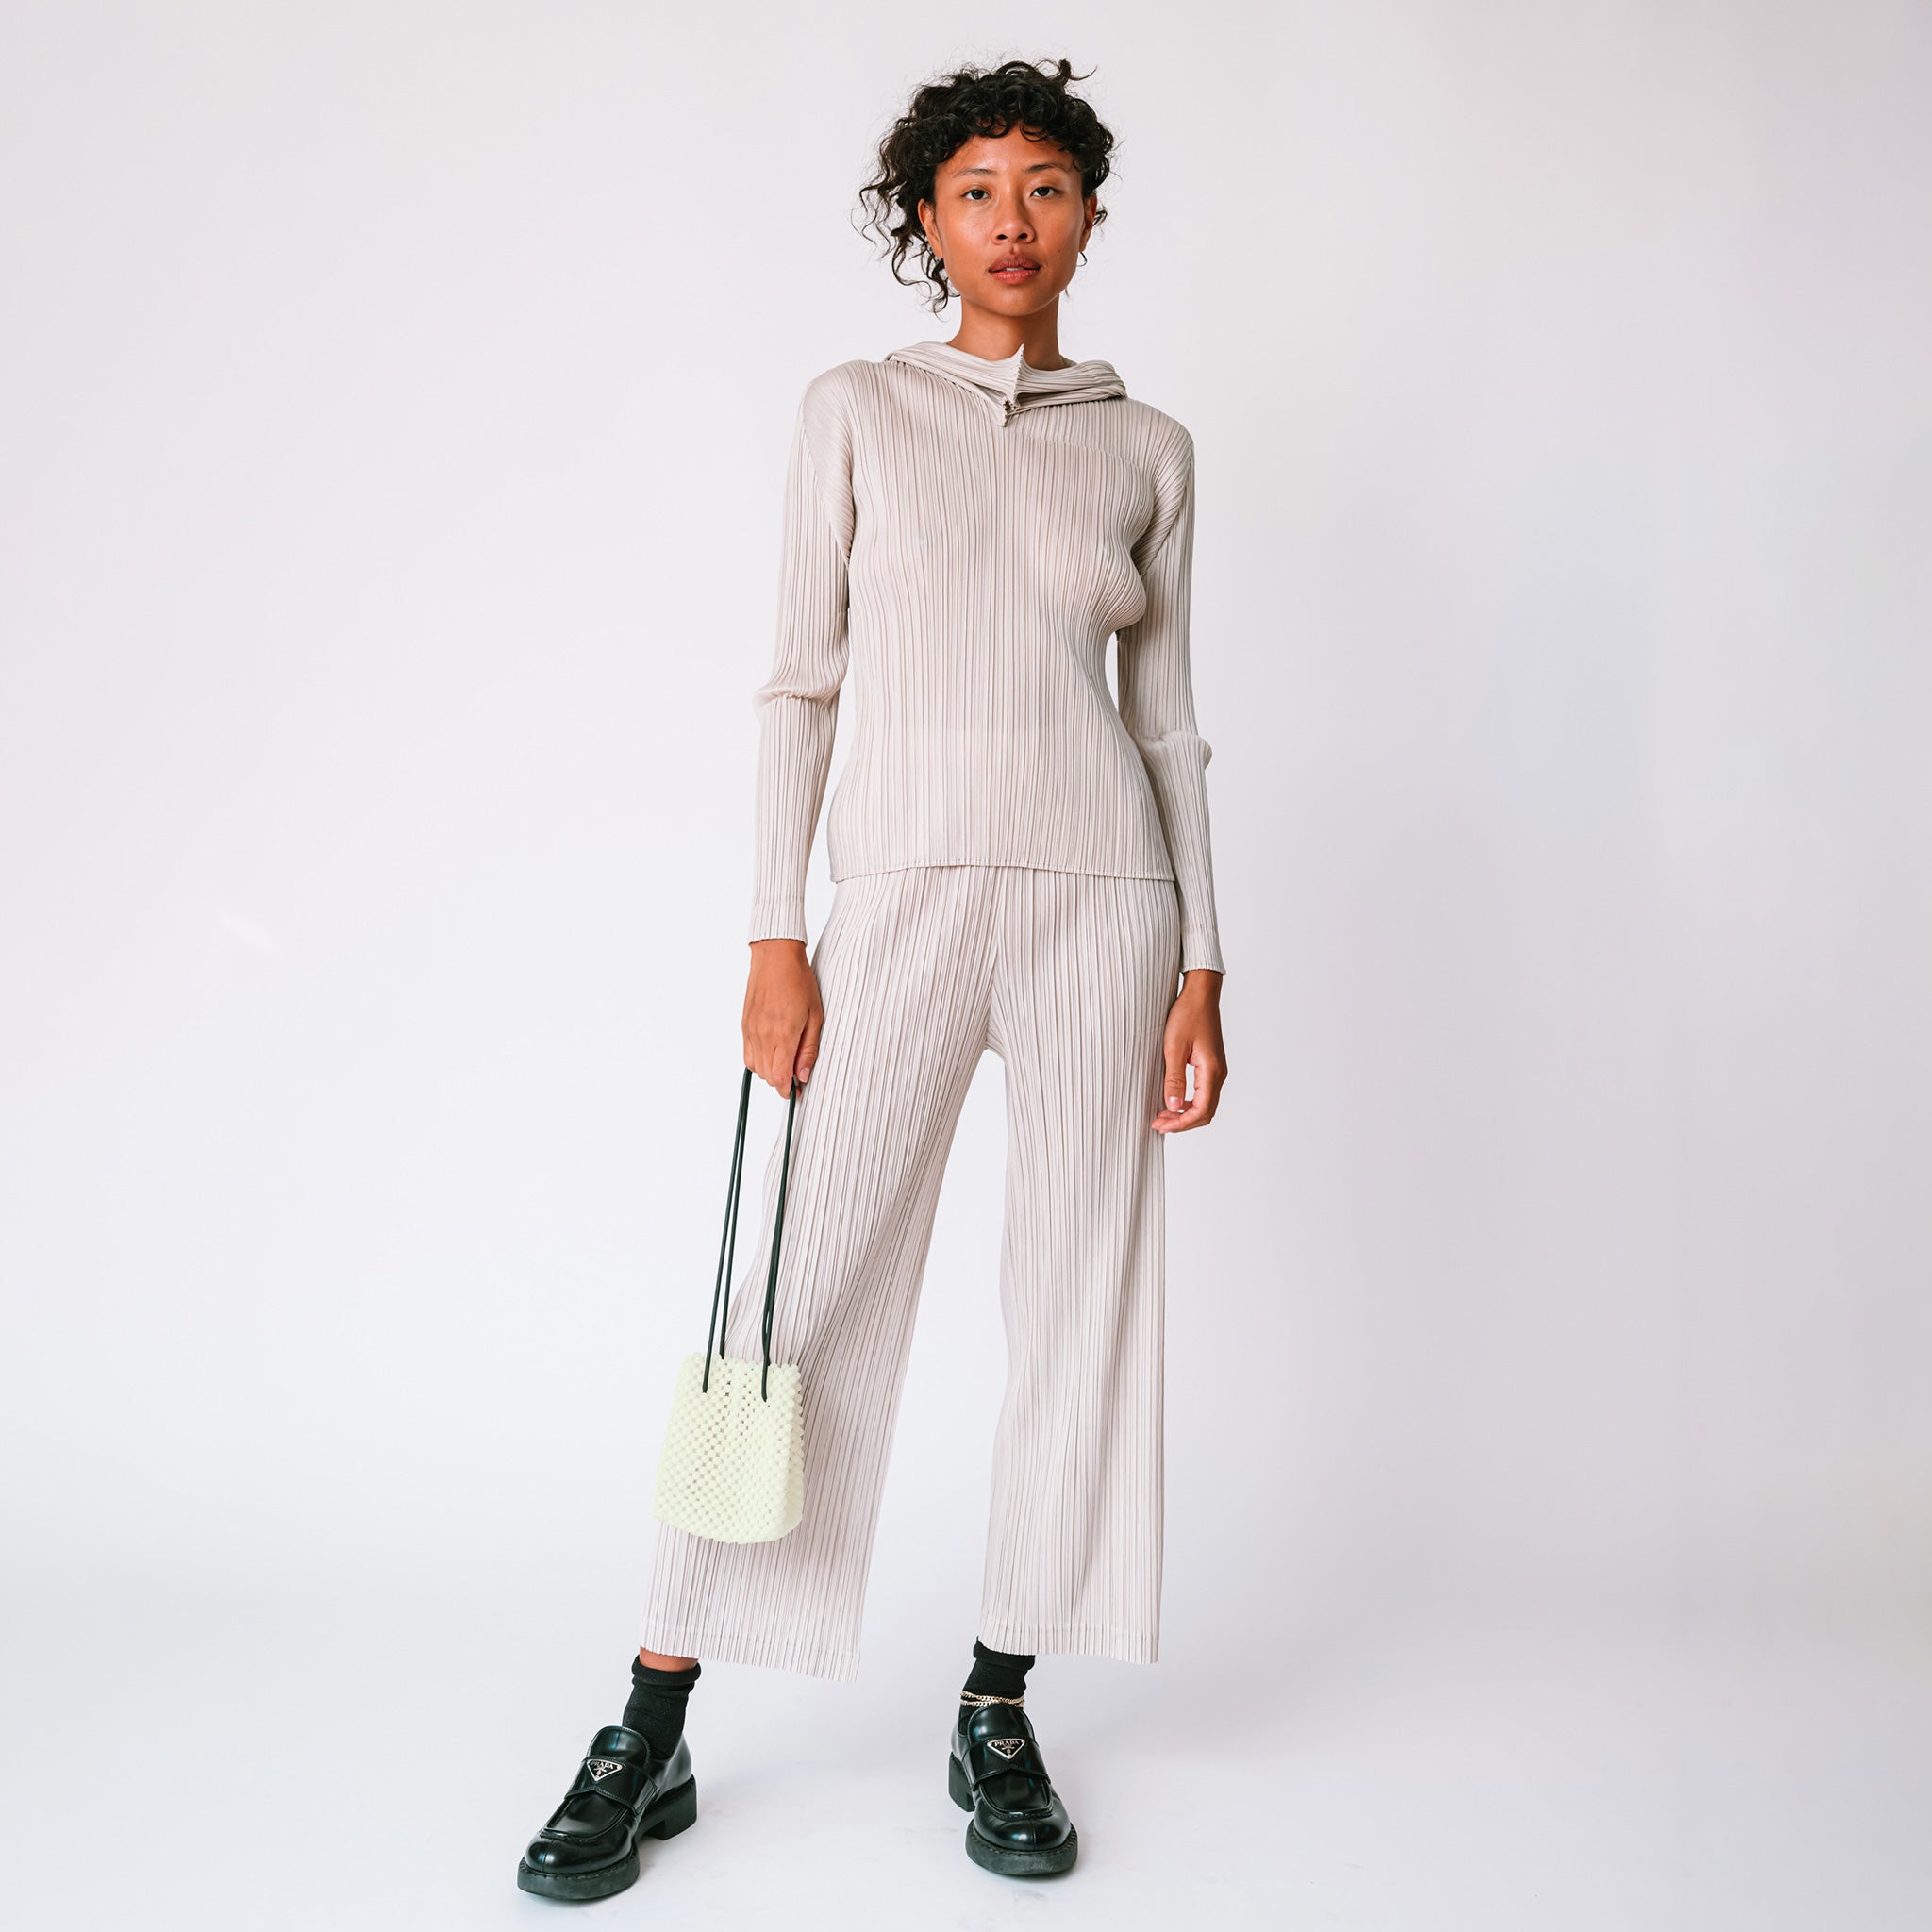 A model wears the light grey pleated Thicker Bottom 2 Pants by Pleats Please with matching hoodie and black loafers while carrying a beaded bag.